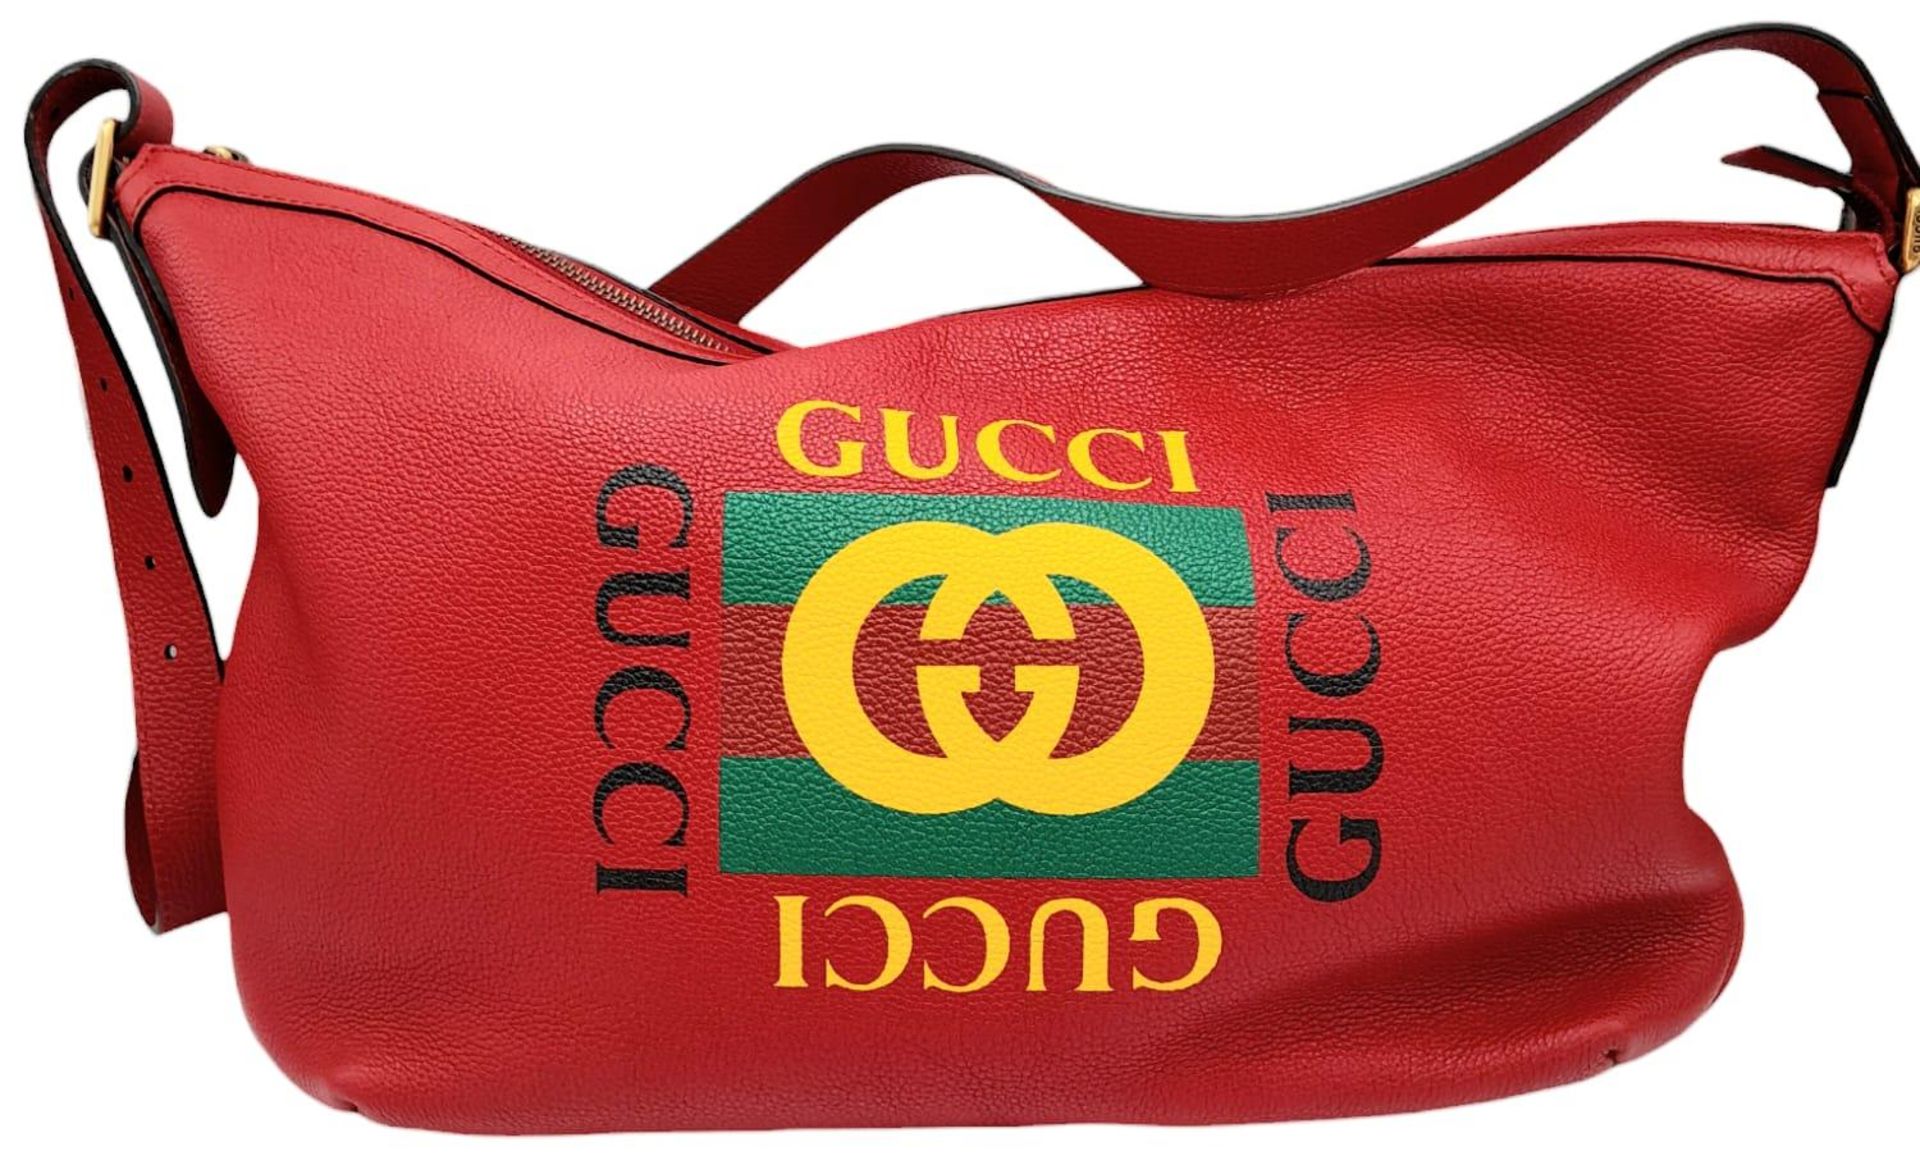 A Gucci Red Logo Shoulder Bag. Leather exterior with gold-toned hardware, adjustable strap and